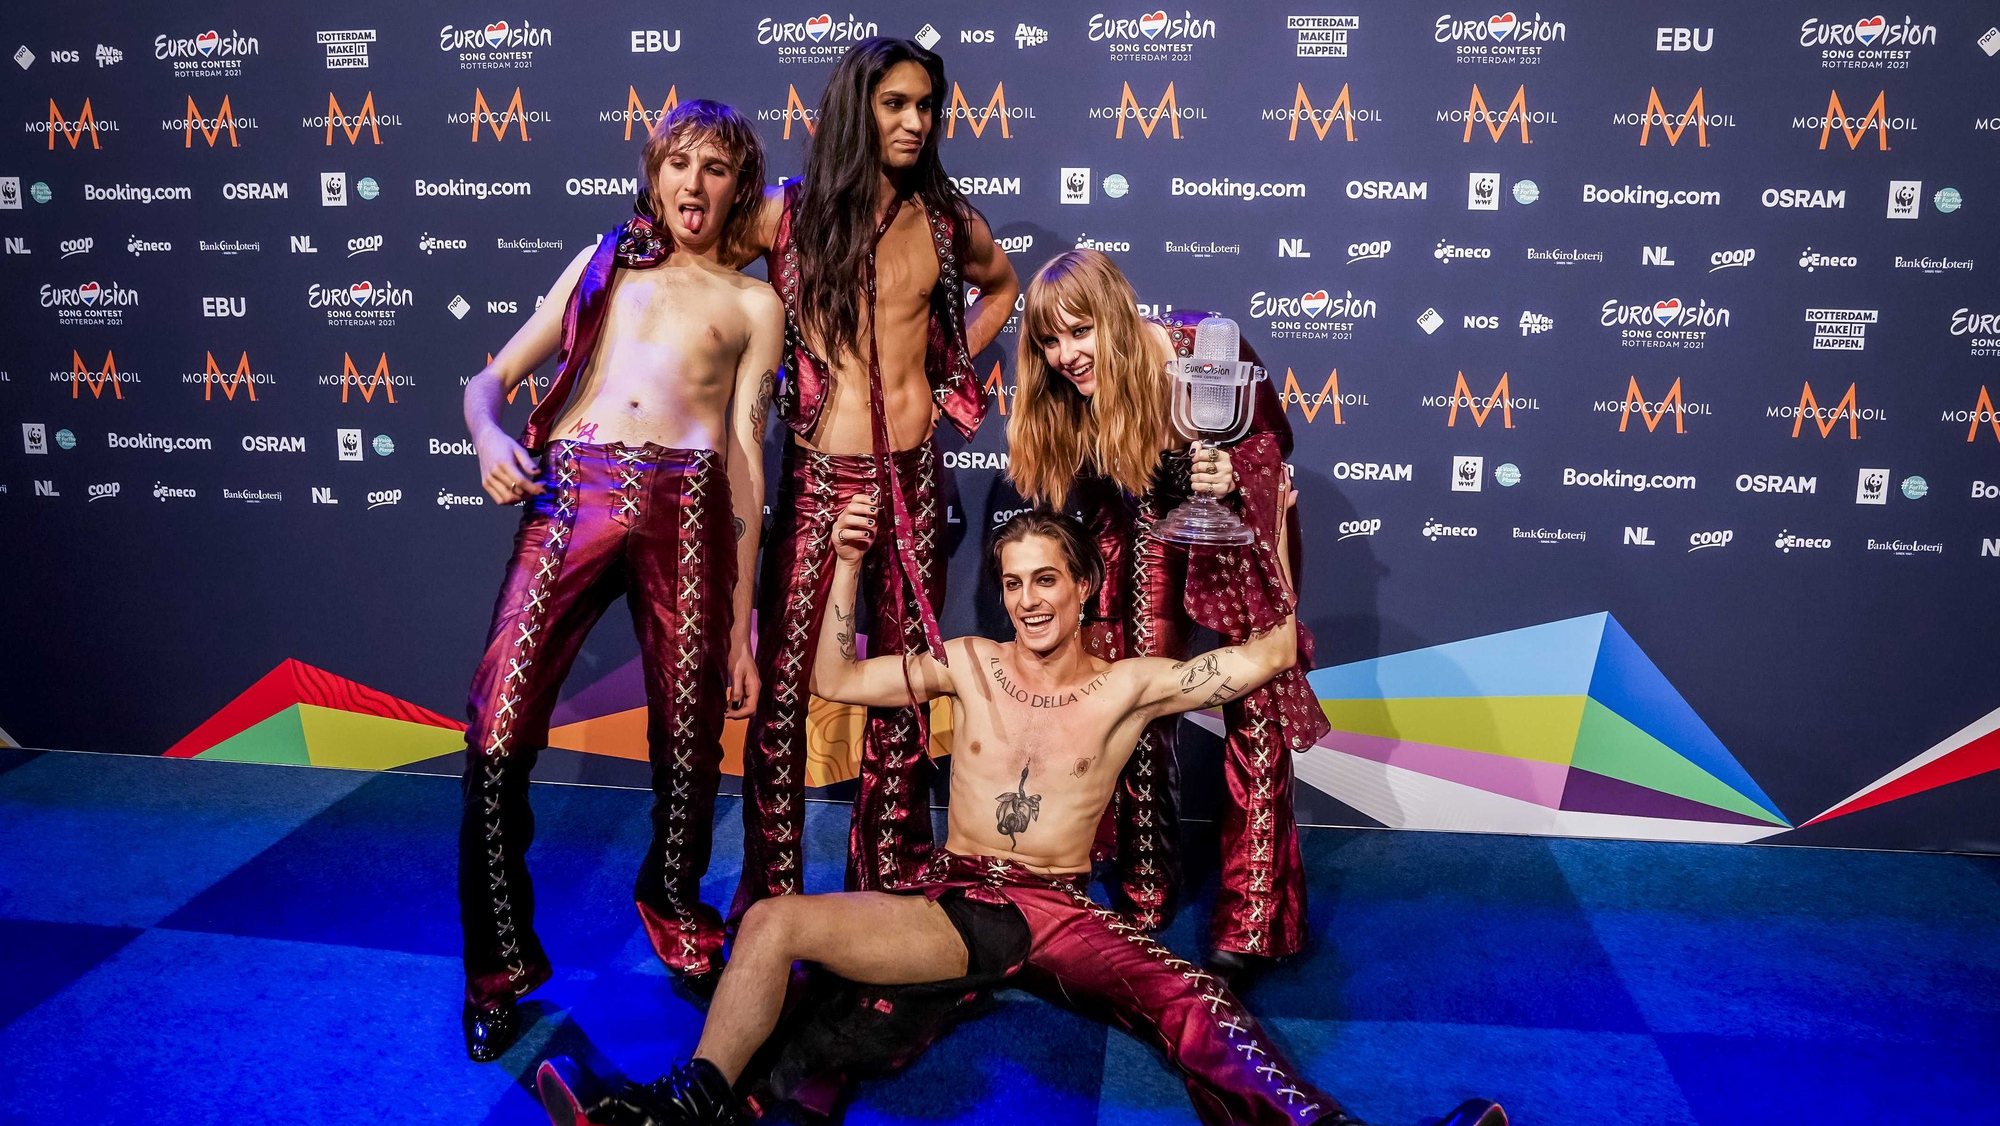 epa09221825 Maneskin from Italy pose for photographs during a press conference after winning the Grand Final of the 65th annual Eurovision Song Contest (ESC) at the Rotterdam Ahoy arena, in Rotterdam, The Netherlands, 22 May 2021. Due to the coronavirus (COVID-19) pandemic, only a limited number of visitors is allowed at the 65th edition of the Eurovision Song Contest (ESC2021) that is taking place in an adapted form at the Rotterdam Ahoy.  EPA/Sander Koning / POOL *** Local Caption *** 50359766